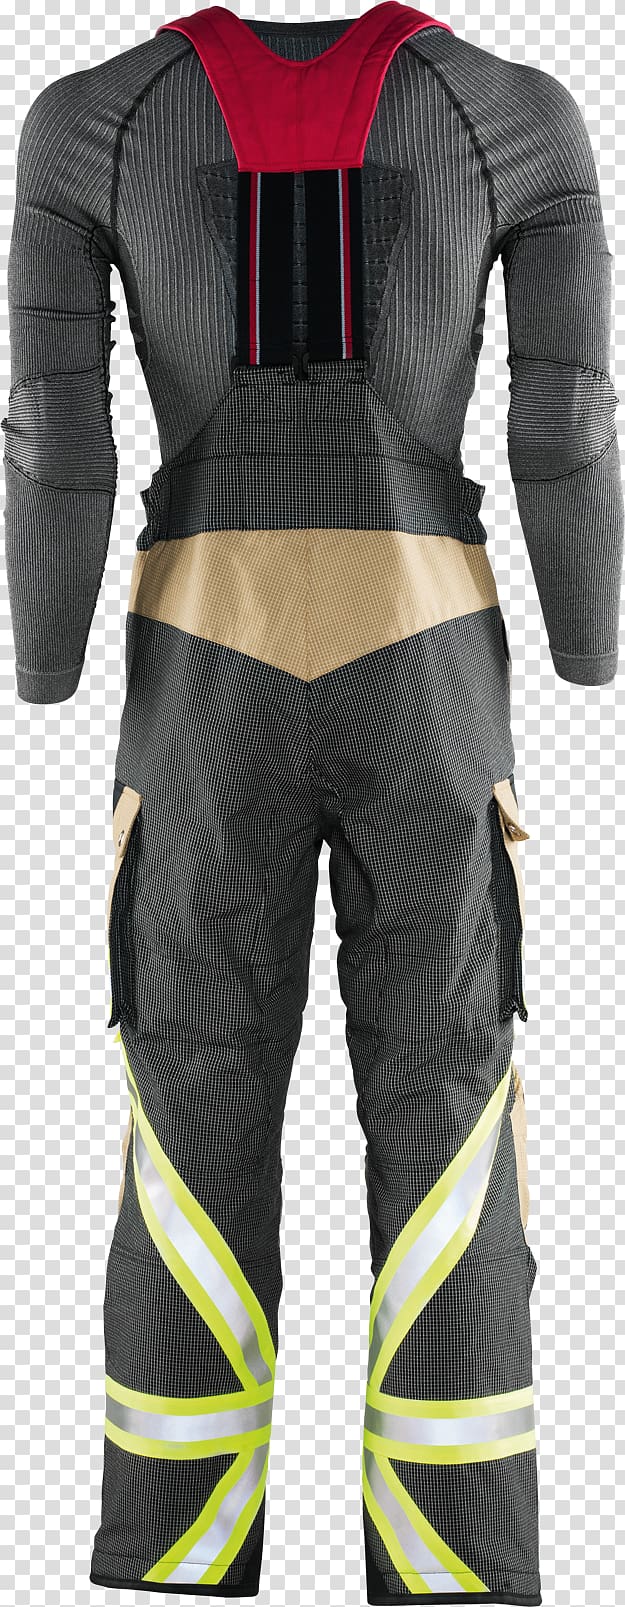 Fire Personal protective equipment Clothing Nomex Gore-Tex, pocket knife transparent background PNG clipart